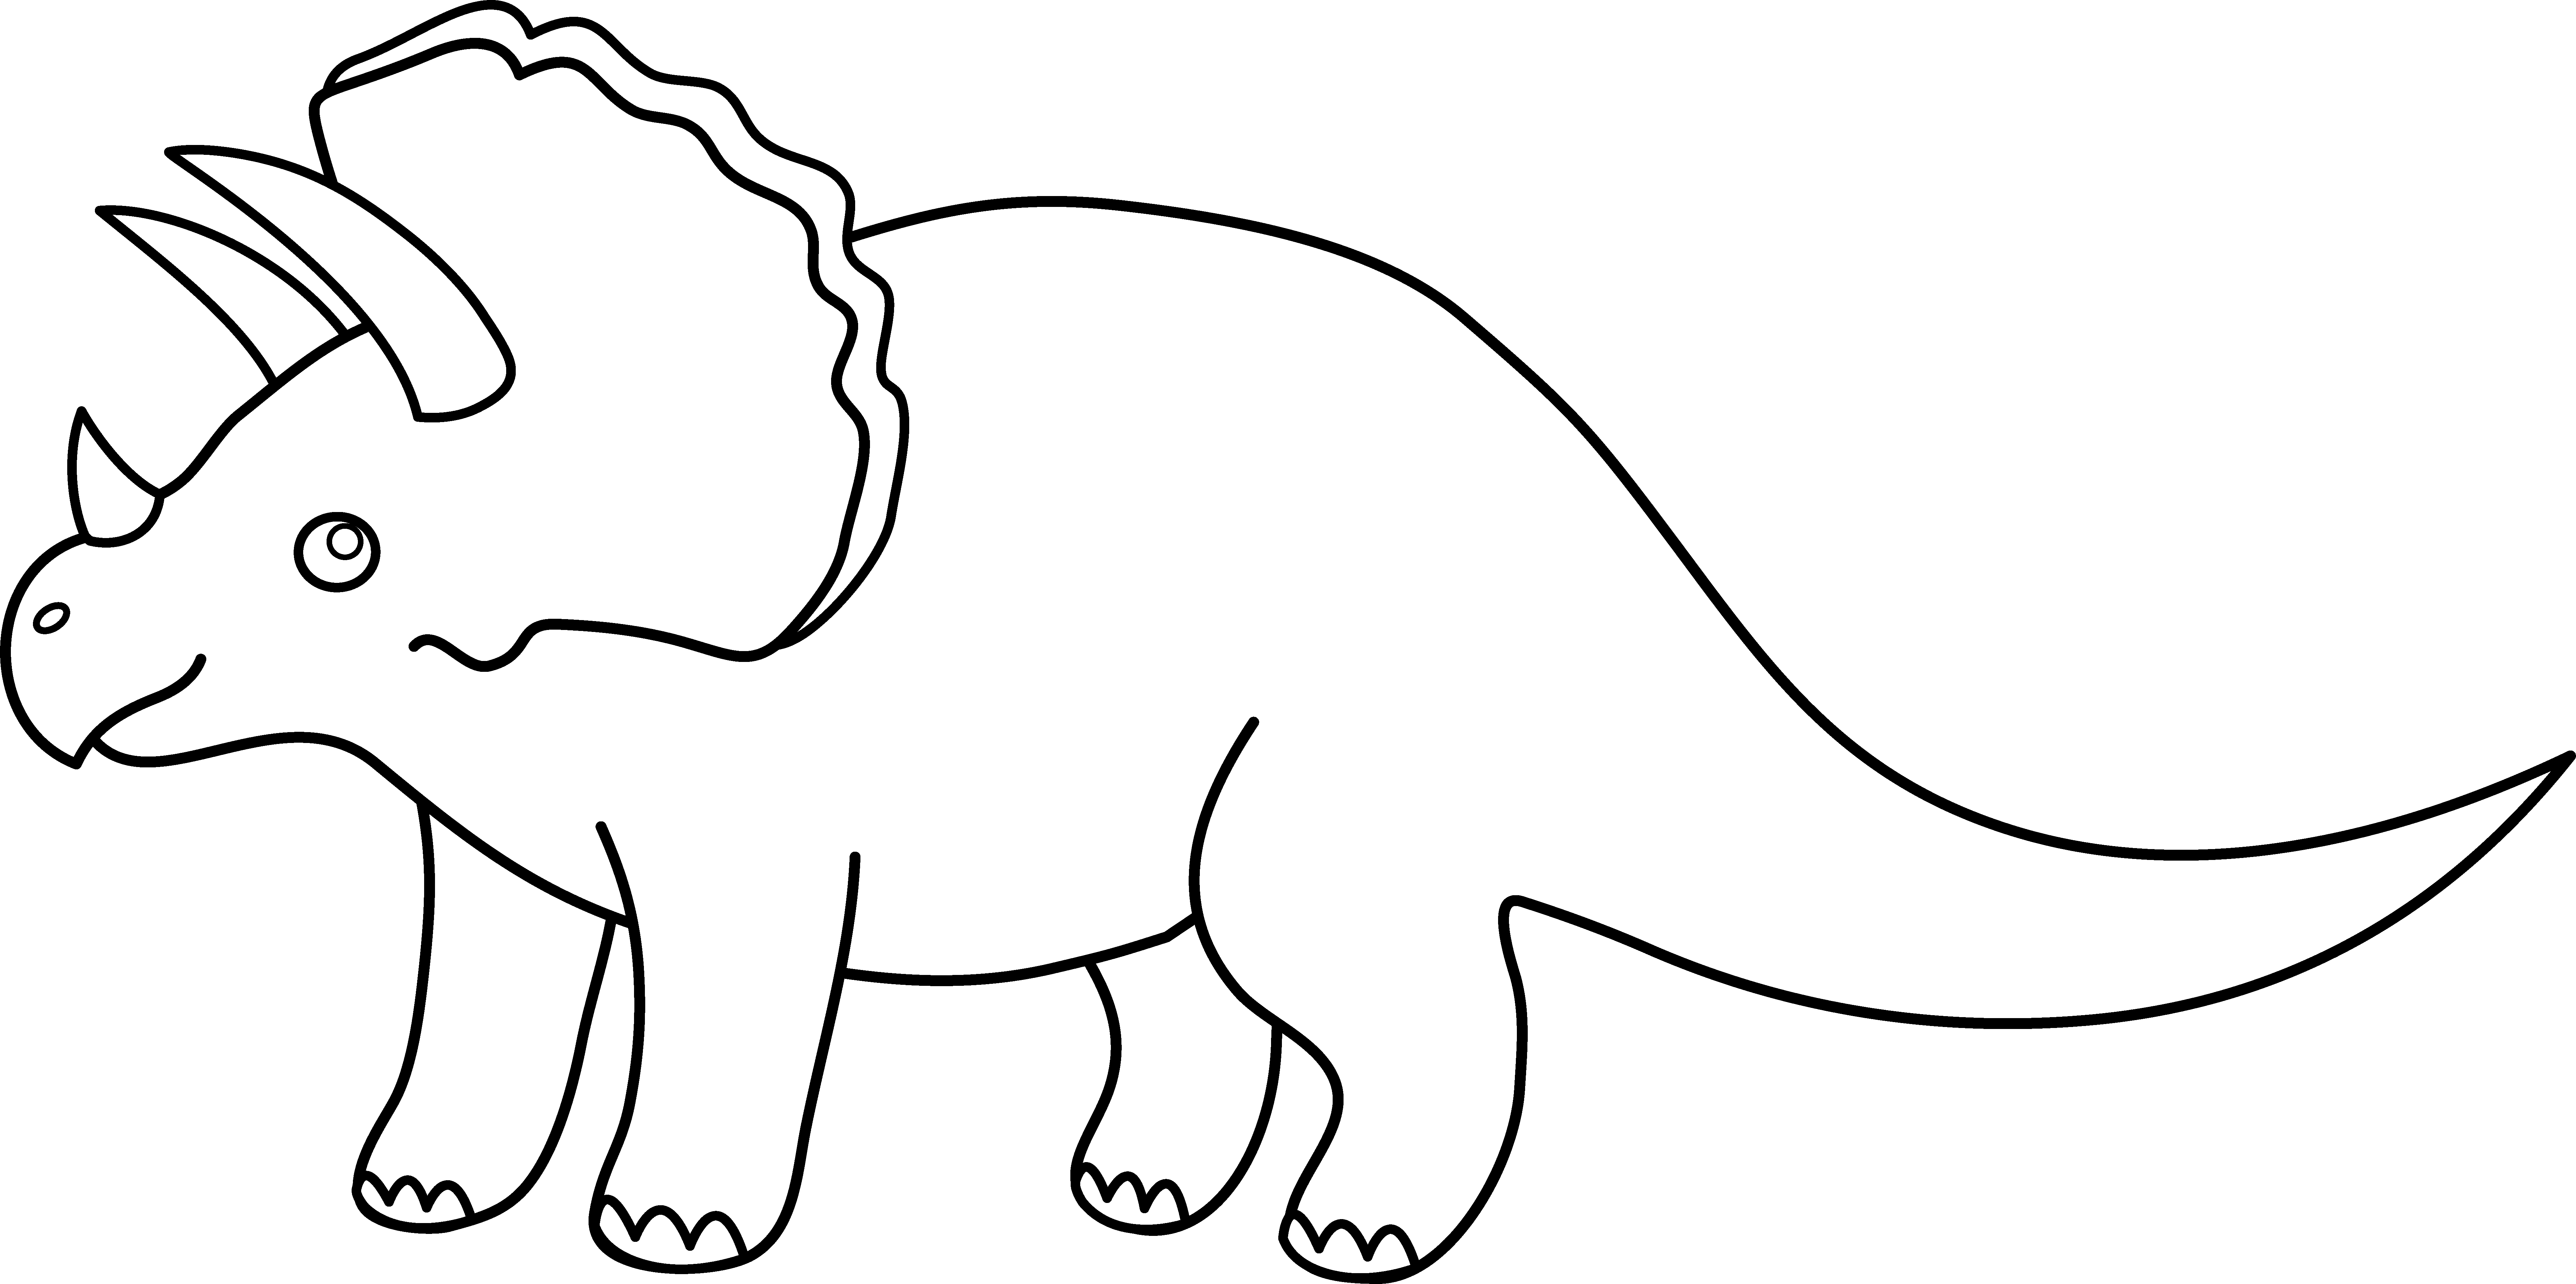 Dinosaur Line Drawing Cliparts.co